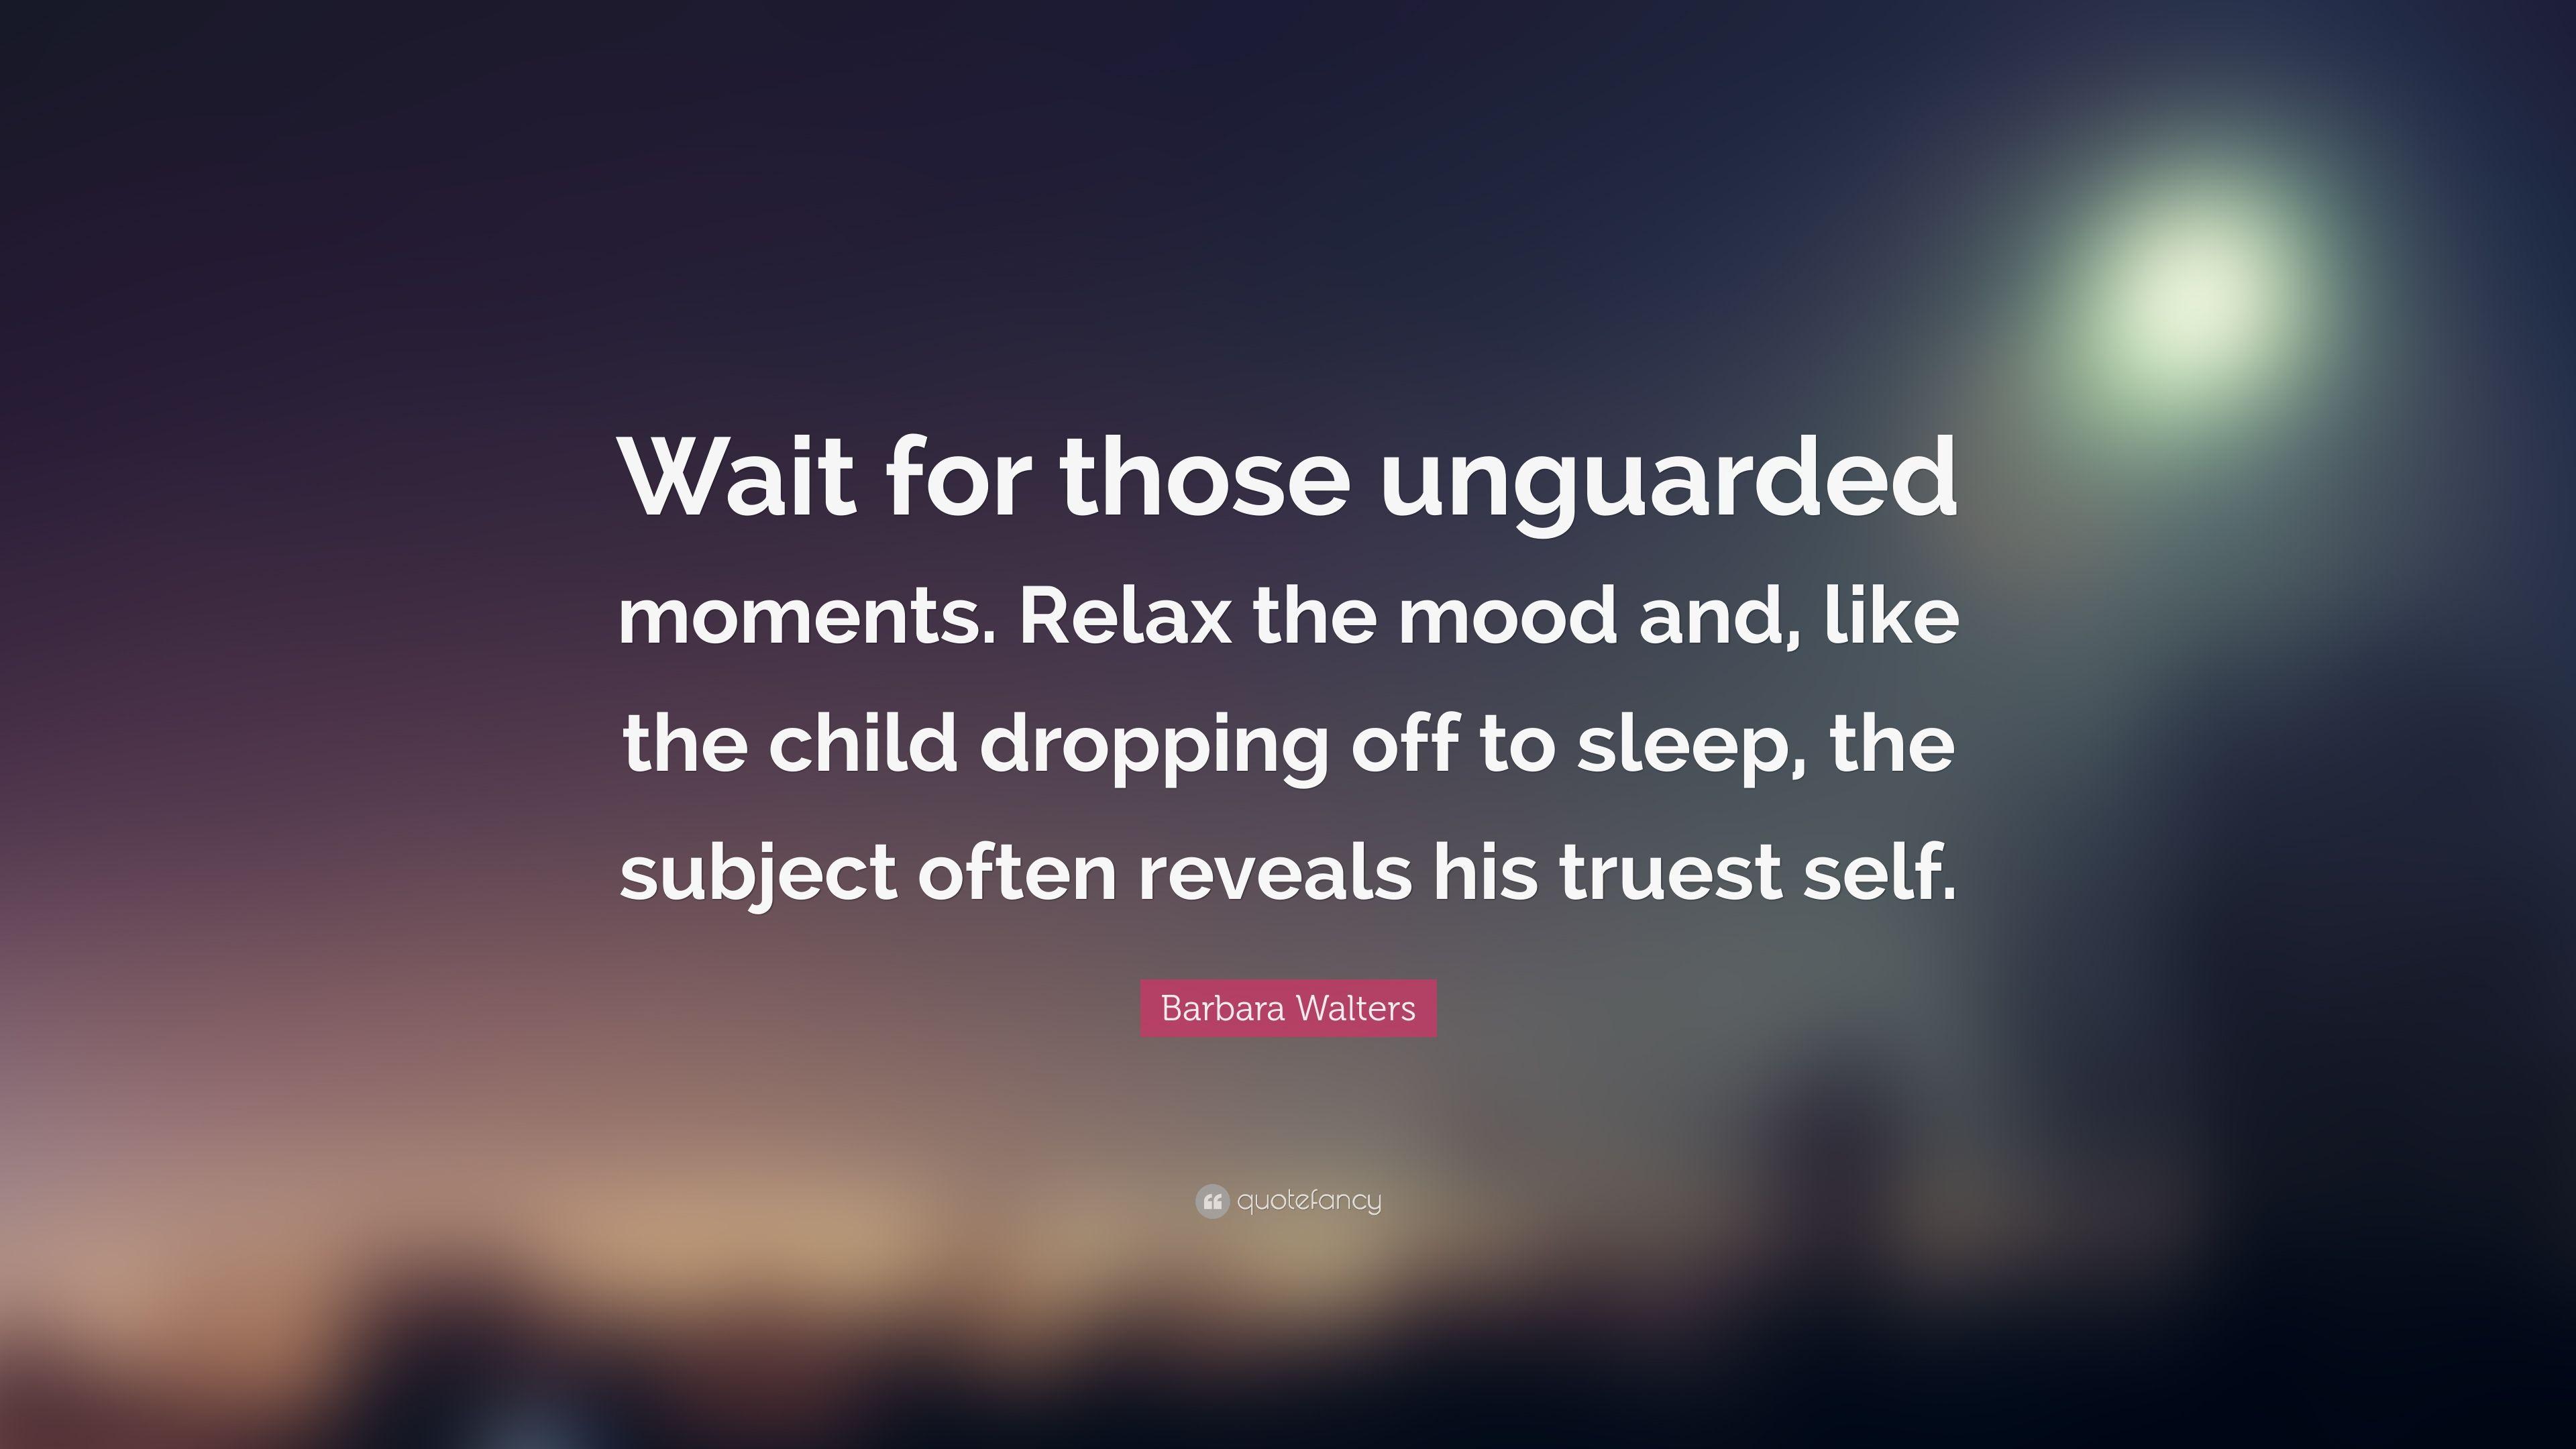 Barbara Walters Quote: “Wait for those unguarded moments